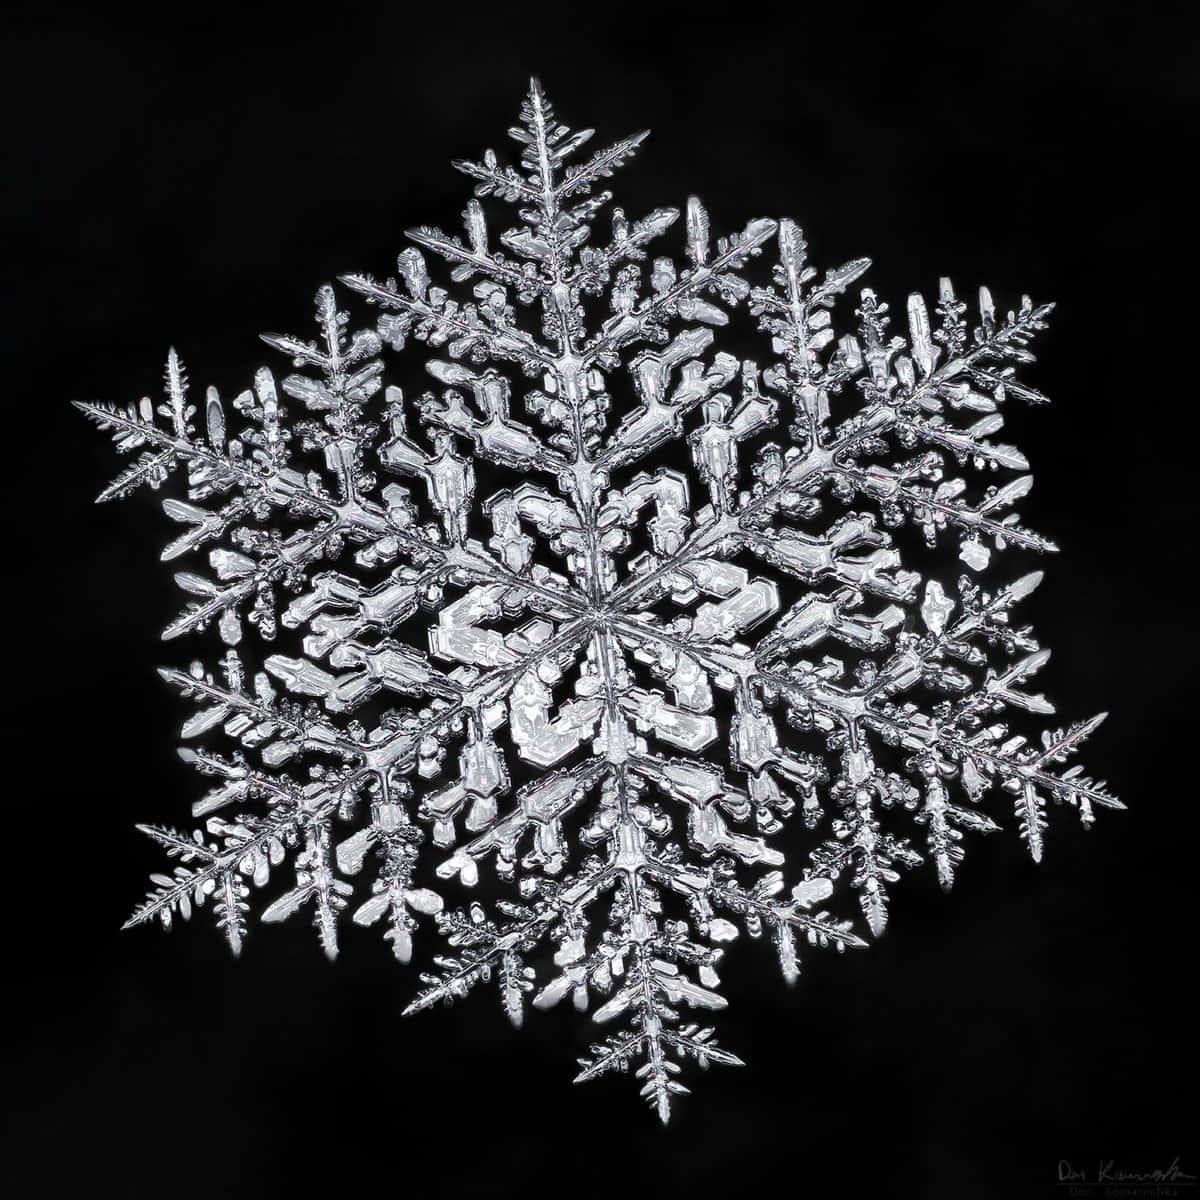 A Snowflake Is Shown On A Black Background